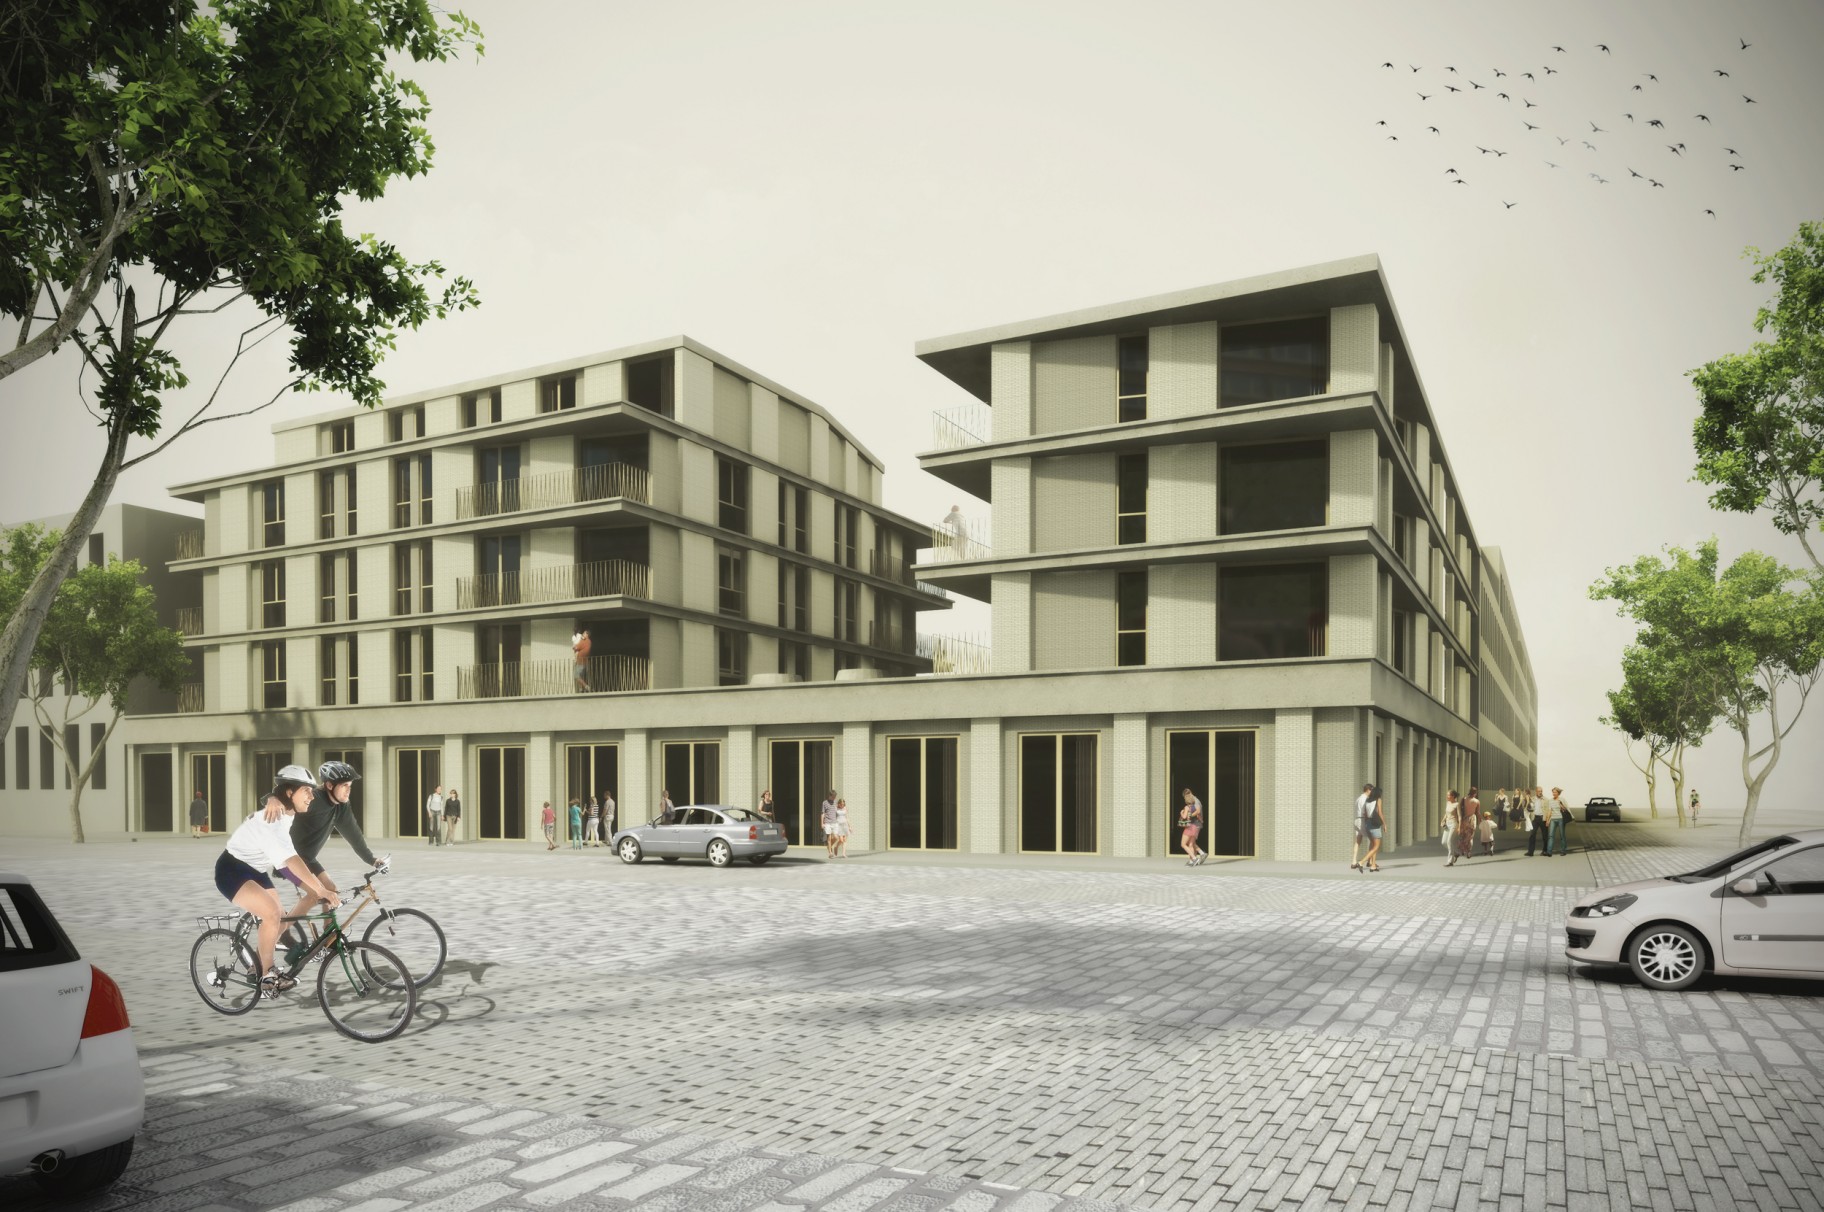 Competition Sociale woningen Cadix submitted